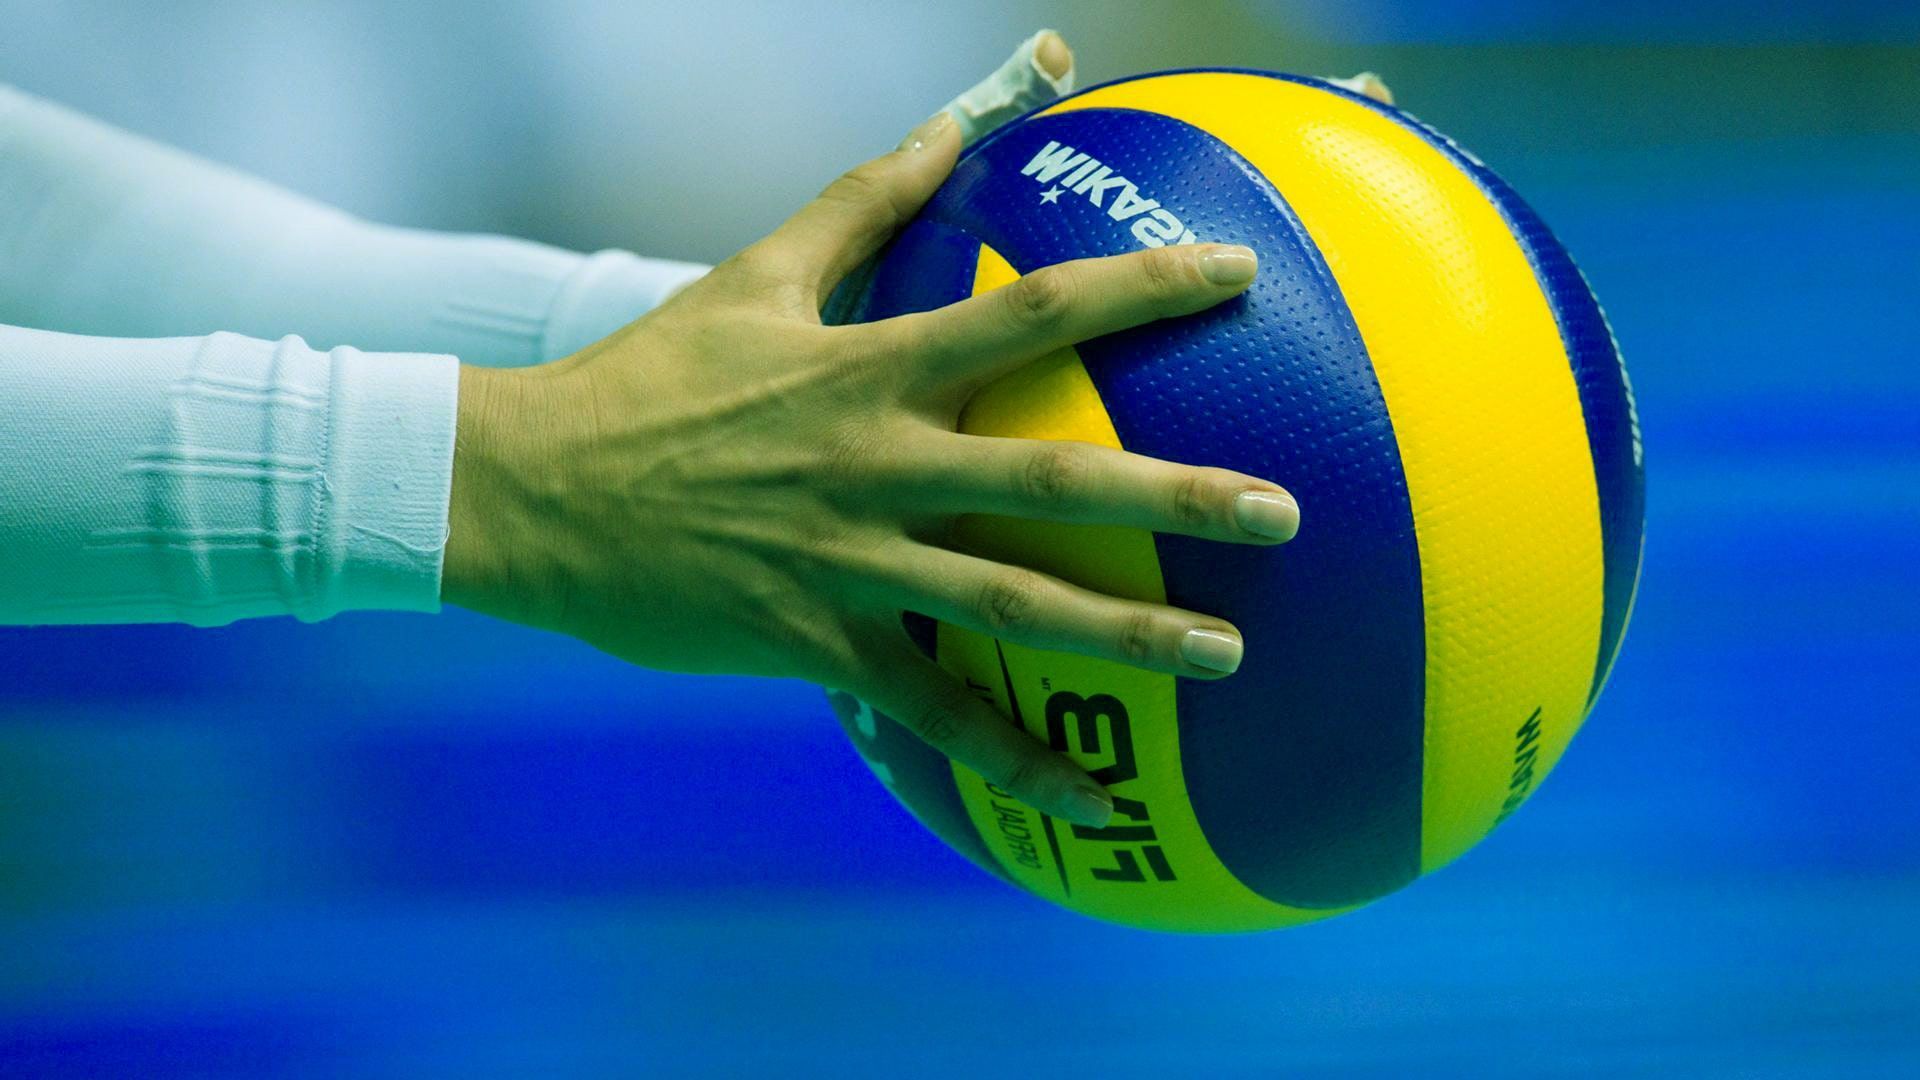 Volleyball player passing the ball during a game - Volleyball